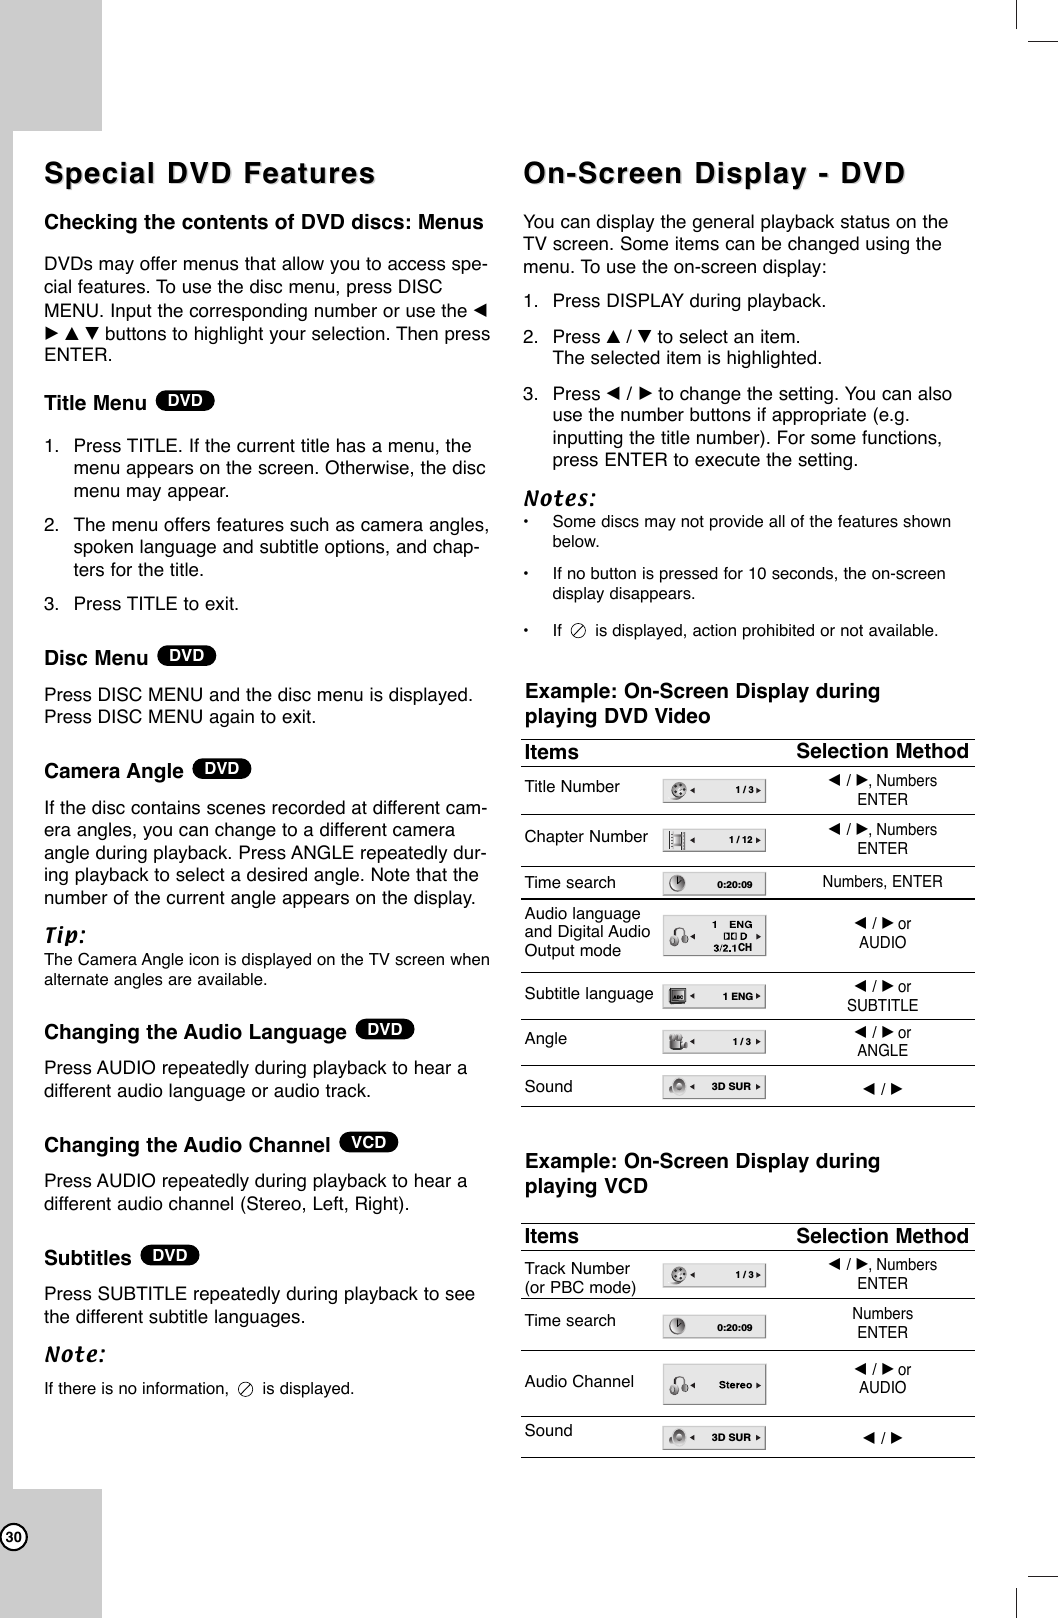 30Special DVD Features Special DVD Features Checking the contents of DVD discs: MenusDVDs may offer menus that allow you to access spe-cial features. To use the disc menu, press DISCMENU. Input the corresponding number or use the bB v V buttons to highlight your selection. Then pressENTER.Title Menu 1. Press TITLE. If the current title has a menu, themenu appears on the screen. Otherwise, the discmenu may appear.2. The menu offers features such as camera angles,spoken language and subtitle options, and chap-ters for the title.3. Press TITLE to exit.Disc Menu Press DISC MENU and the disc menu is displayed.Press DISC MENU again to exit.Camera Angle If the disc contains scenes recorded at different cam-era angles, you can change to a different cameraangle during playback. Press ANGLE repeatedly dur-ing playback to select a desired angle. Note that thenumber of the current angle appears on the display.Tip:The Camera Angle icon is displayed on the TV screen whenalternate angles are available.Changing the Audio Language Press AUDIO repeatedly during playback to hear adifferent audio language or audio track.Changing the Audio Channel Press AUDIO repeatedly during playback to hear adifferent audio channel (Stereo, Left, Right).Subtitles Press SUBTITLE repeatedly during playback to seethe different subtitle languages.Note:If there is no information,  is displayed.On-Screen Display - DVD On-Screen Display - DVD You can display the general playback status on theTV screen. Some items can be changed using themenu. To use the on-screen display:1. Press DISPLAY during playback.2. Press v/Vto select an item.The selected item is highlighted.3. Press b/Bto change the setting. You can alsouse the number buttons if appropriate (e.g.inputting the title number). For some functions,press ENTER to execute the setting.Notes:•Some discs may not provide all of the features shownbelow.•If no button is pressed for 10 seconds, the on-screendisplay disappears.•If  is displayed, action prohibited or not available.DVDVCDDVDDVDDVDDVDExample: On-Screen Display during playing VCDItemsTitle NumberChapter NumberTime searchAudio language and Digital Audio Output modeSubtitle languageAngleSoundSelection Methodb/ B,Numbers ENTERb/ B,Numbers ENTERNumbers, ENTERb/ BorAUDIOb/ BorSUBTITLEb/ BorANGLEb/ B1 / 31 / 120:20:09CHABC1 ENG1 / 33D SURExample: On-Screen Display during playing DVD VideoItemsTrack Number(or PBC mode)Time searchAudio ChannelSoundSelection Methodb/ B,Numbers ENTERNumbers ENTERb/ BorAUDIOb/ B1 / 30:20:093D SUR